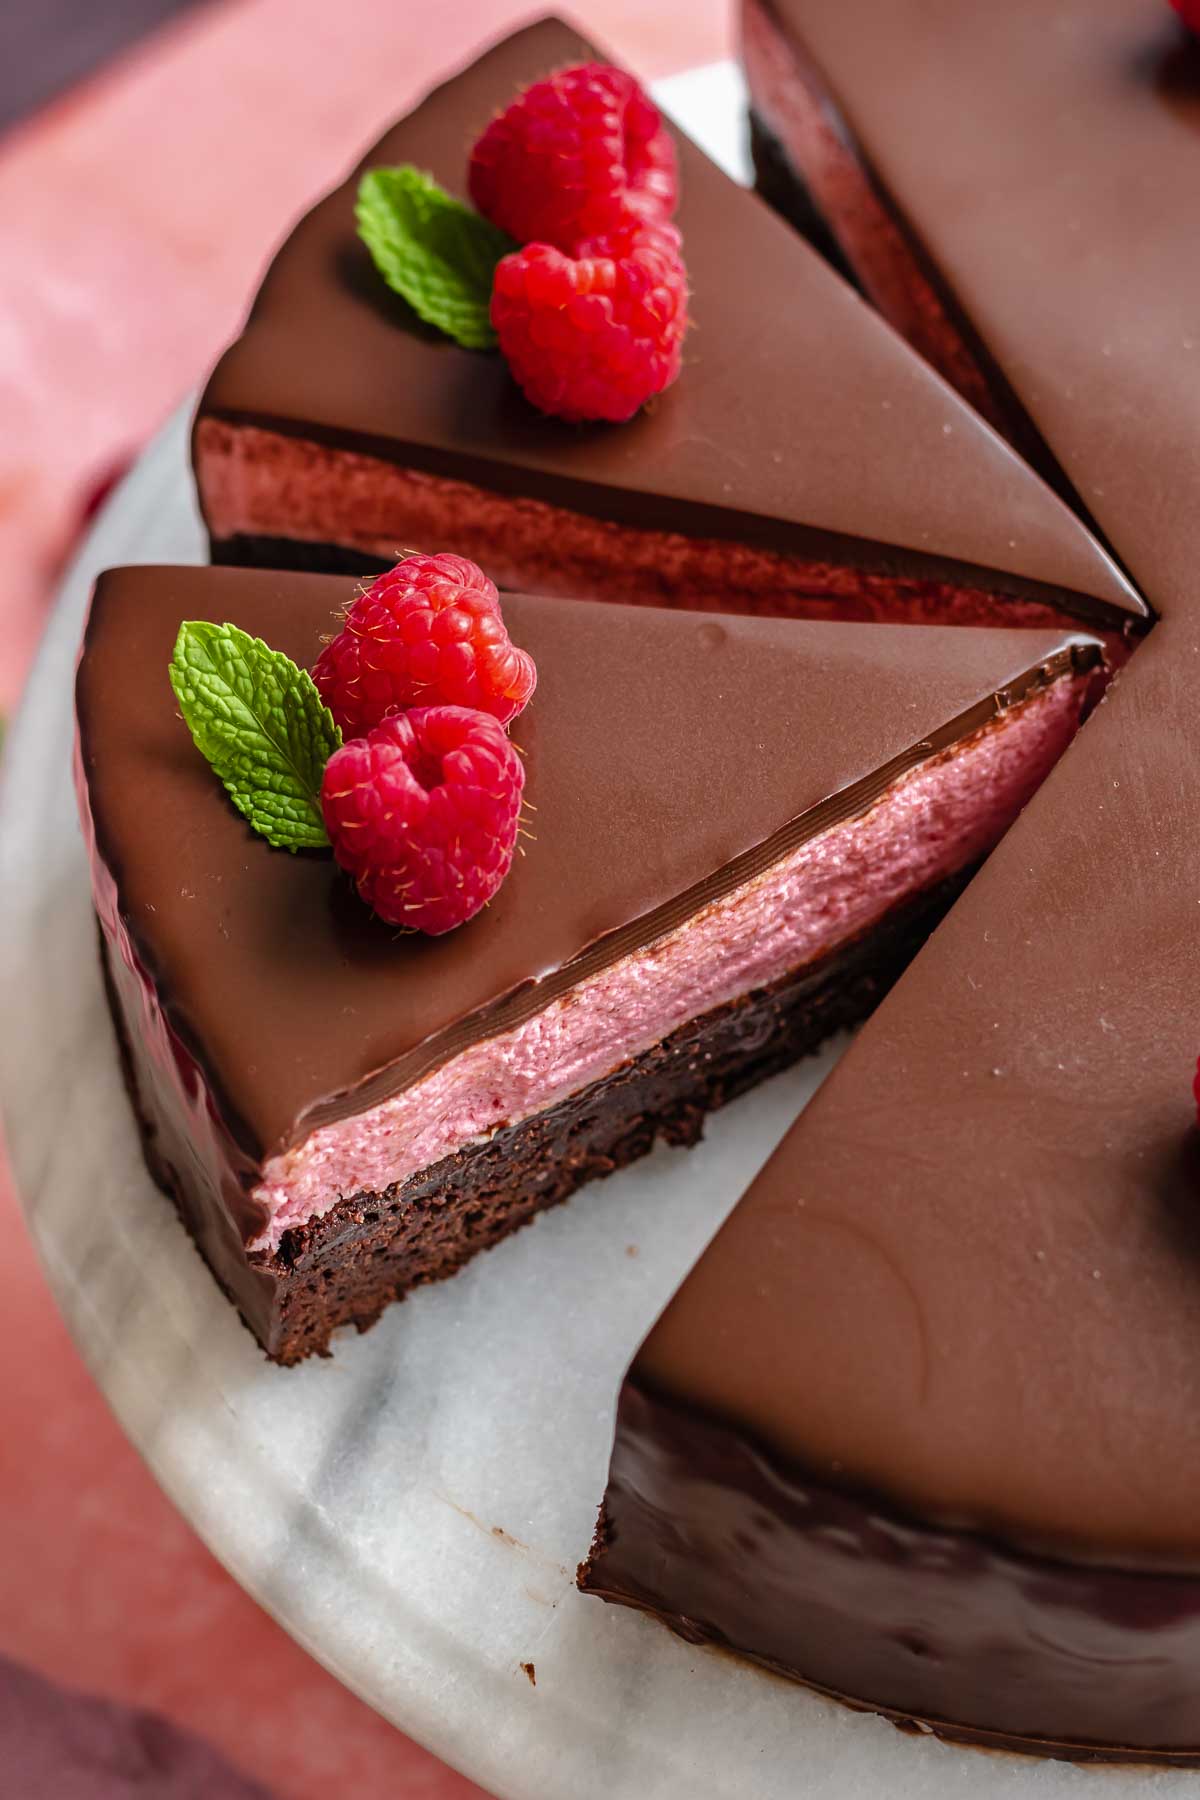 Slice of raspberry mousse cake sliced to show the inside.